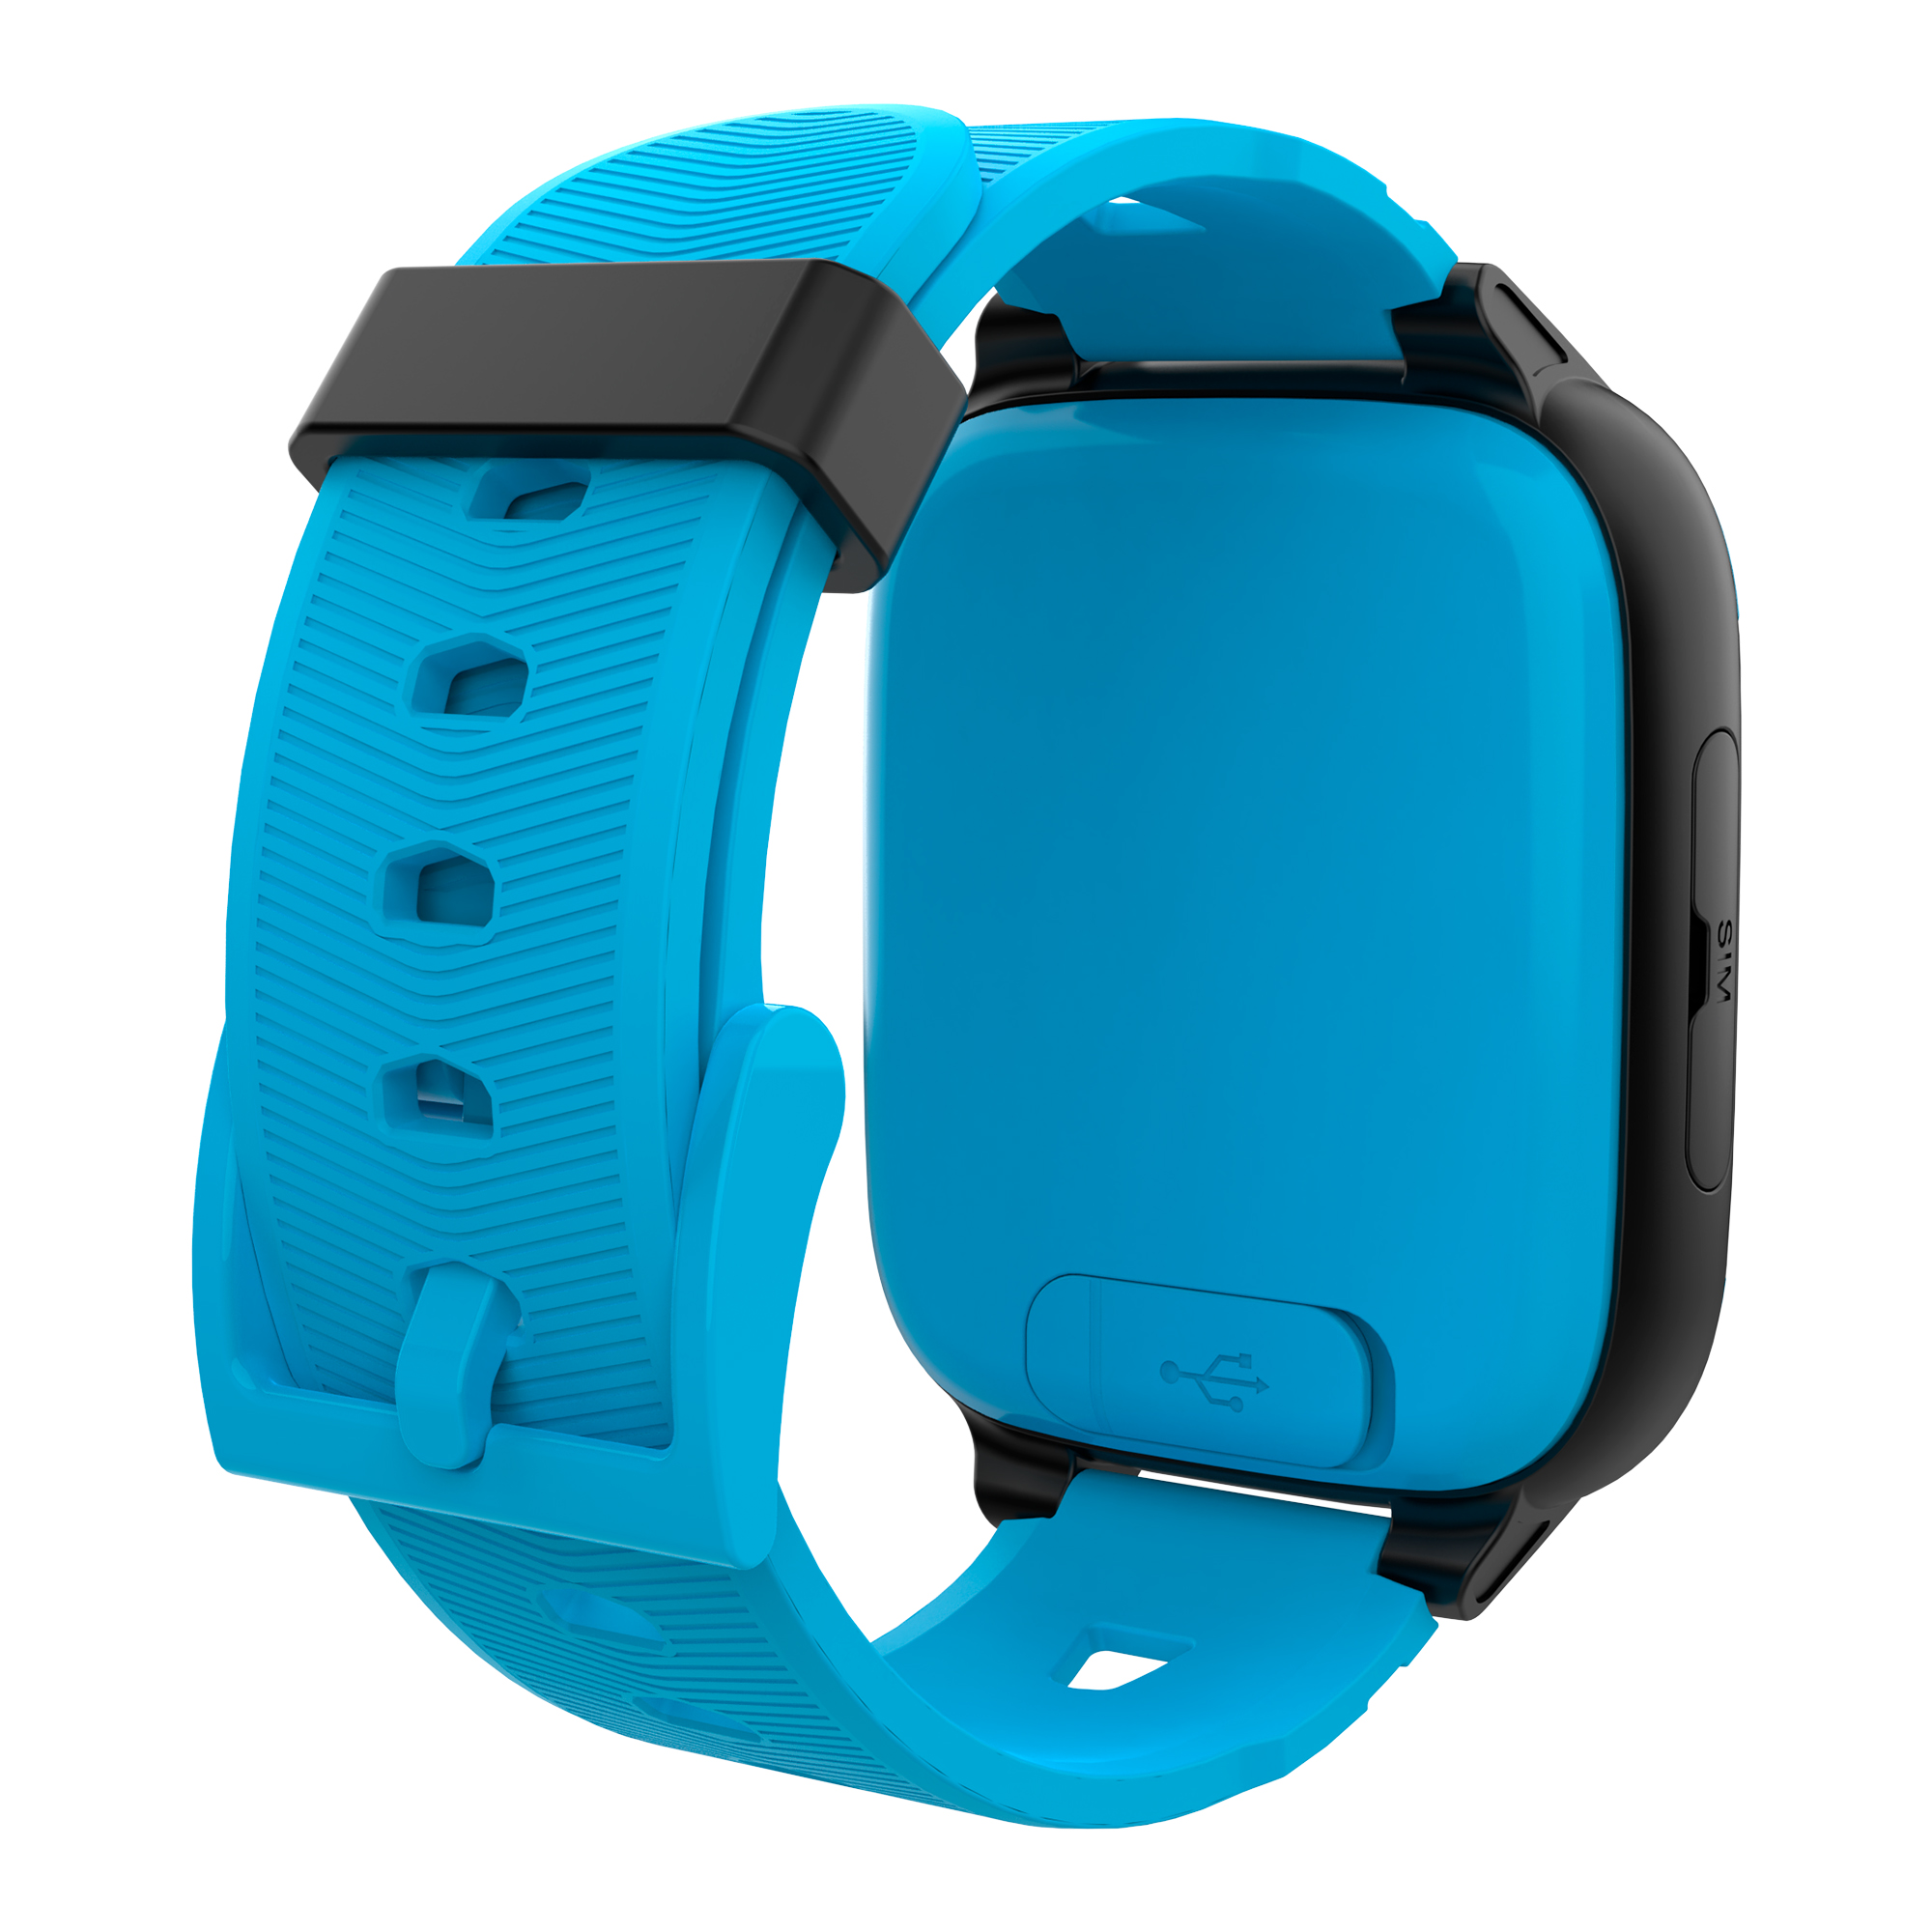 Back View: Xplora XGO3 - Watch Phone for Children Calls, Messages, SOS, GPS Tracker, Camera, Step Counter, SIM Card included. Blue - Blue